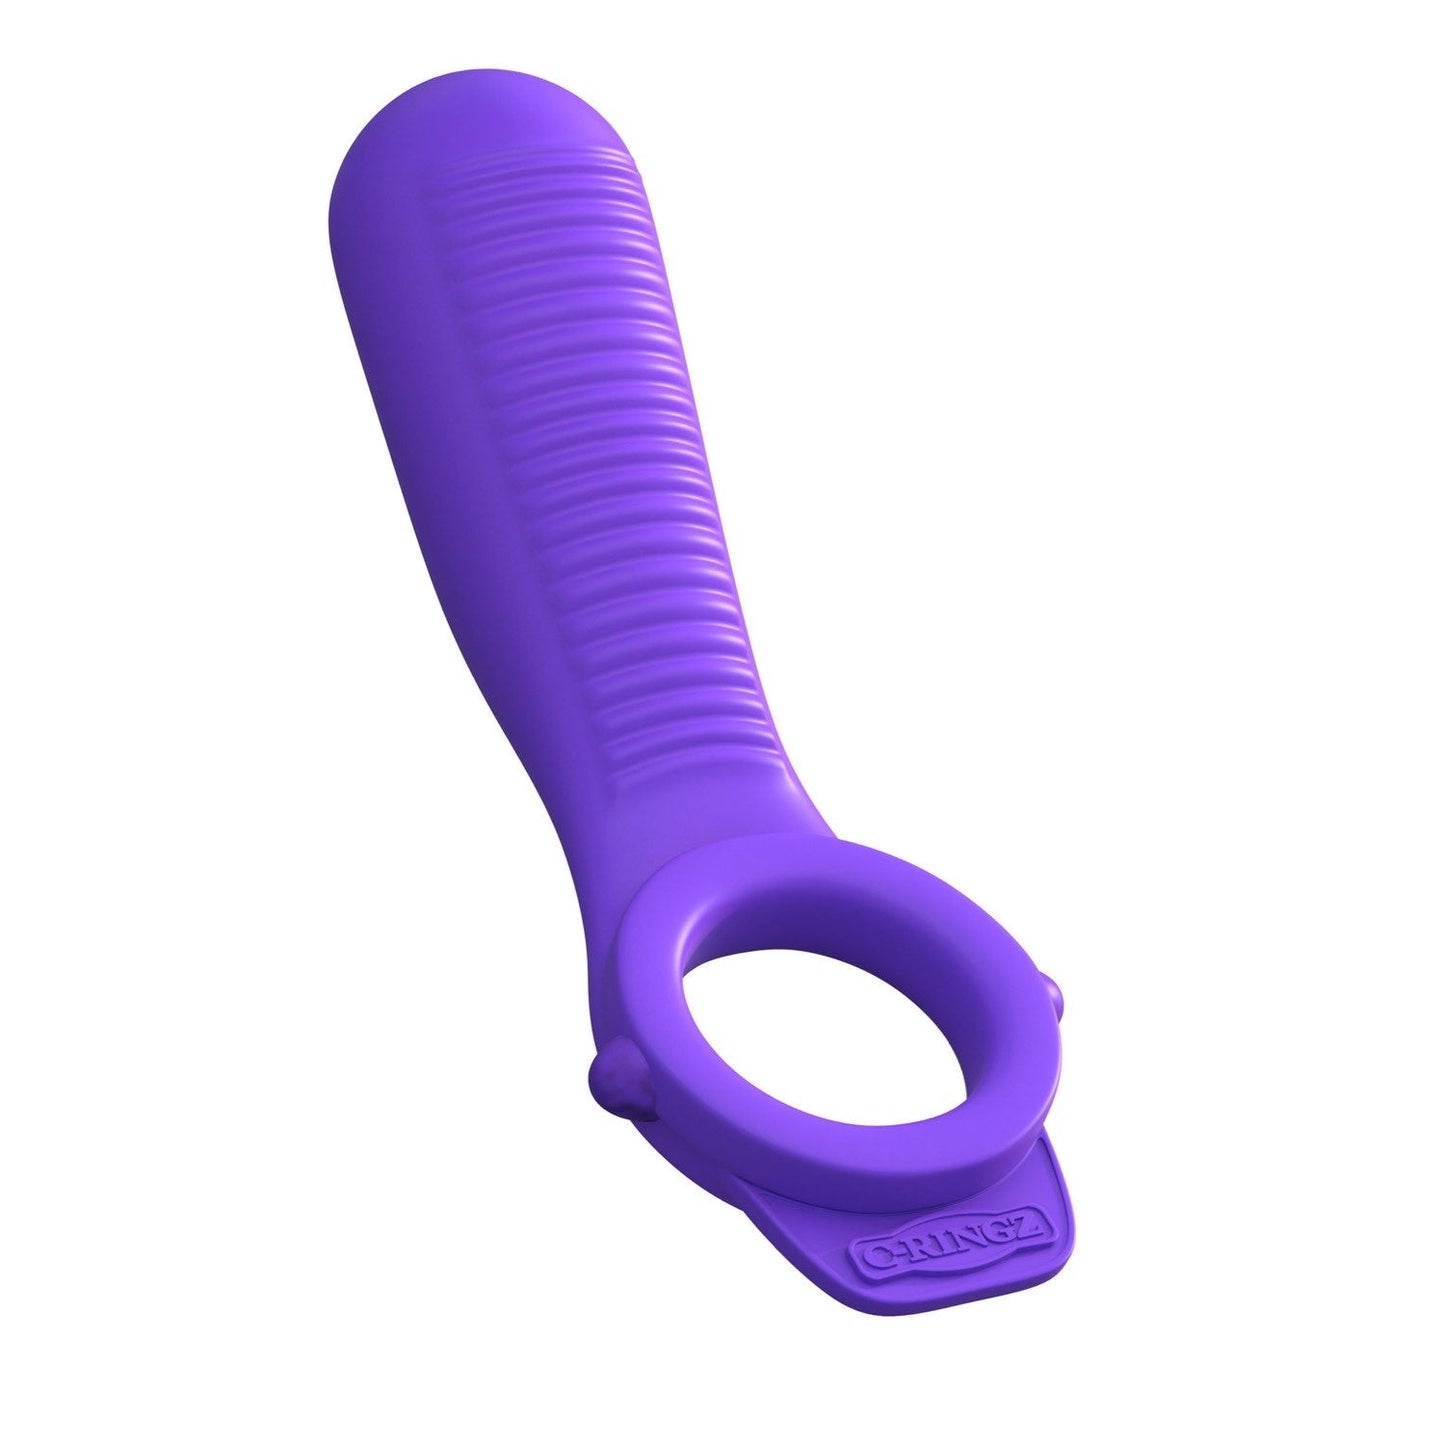 Fantasy C-ringz Ride N' Clide Couples Ring - Purple Vibrating Cock Ring